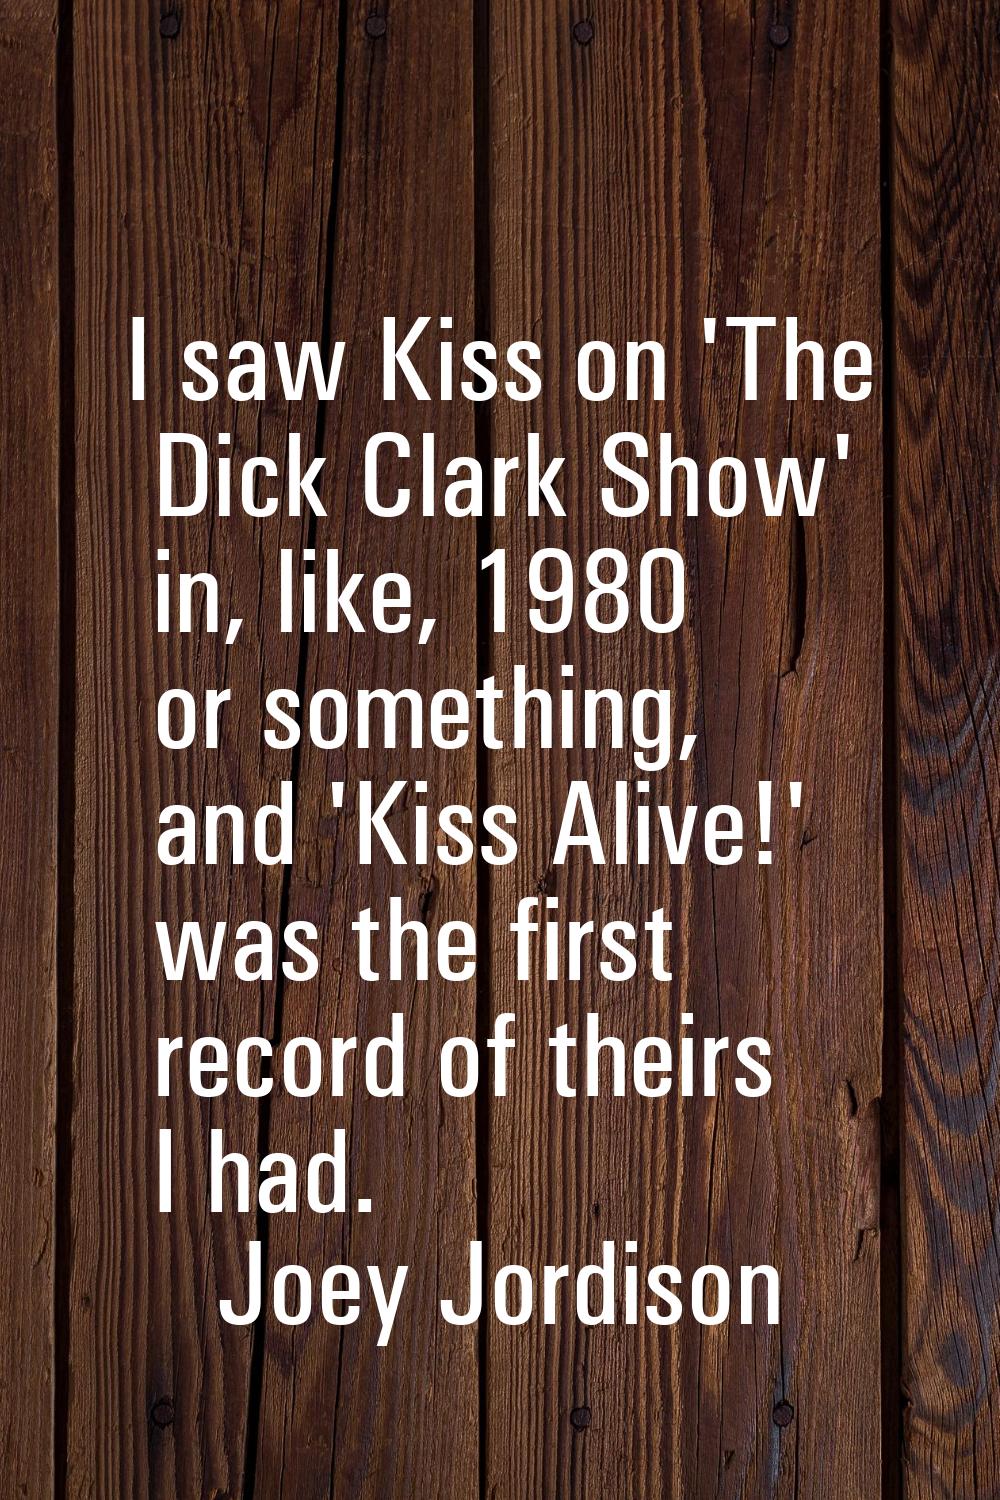 I saw Kiss on 'The Dick Clark Show' in, like, 1980 or something, and 'Kiss Alive!' was the first re